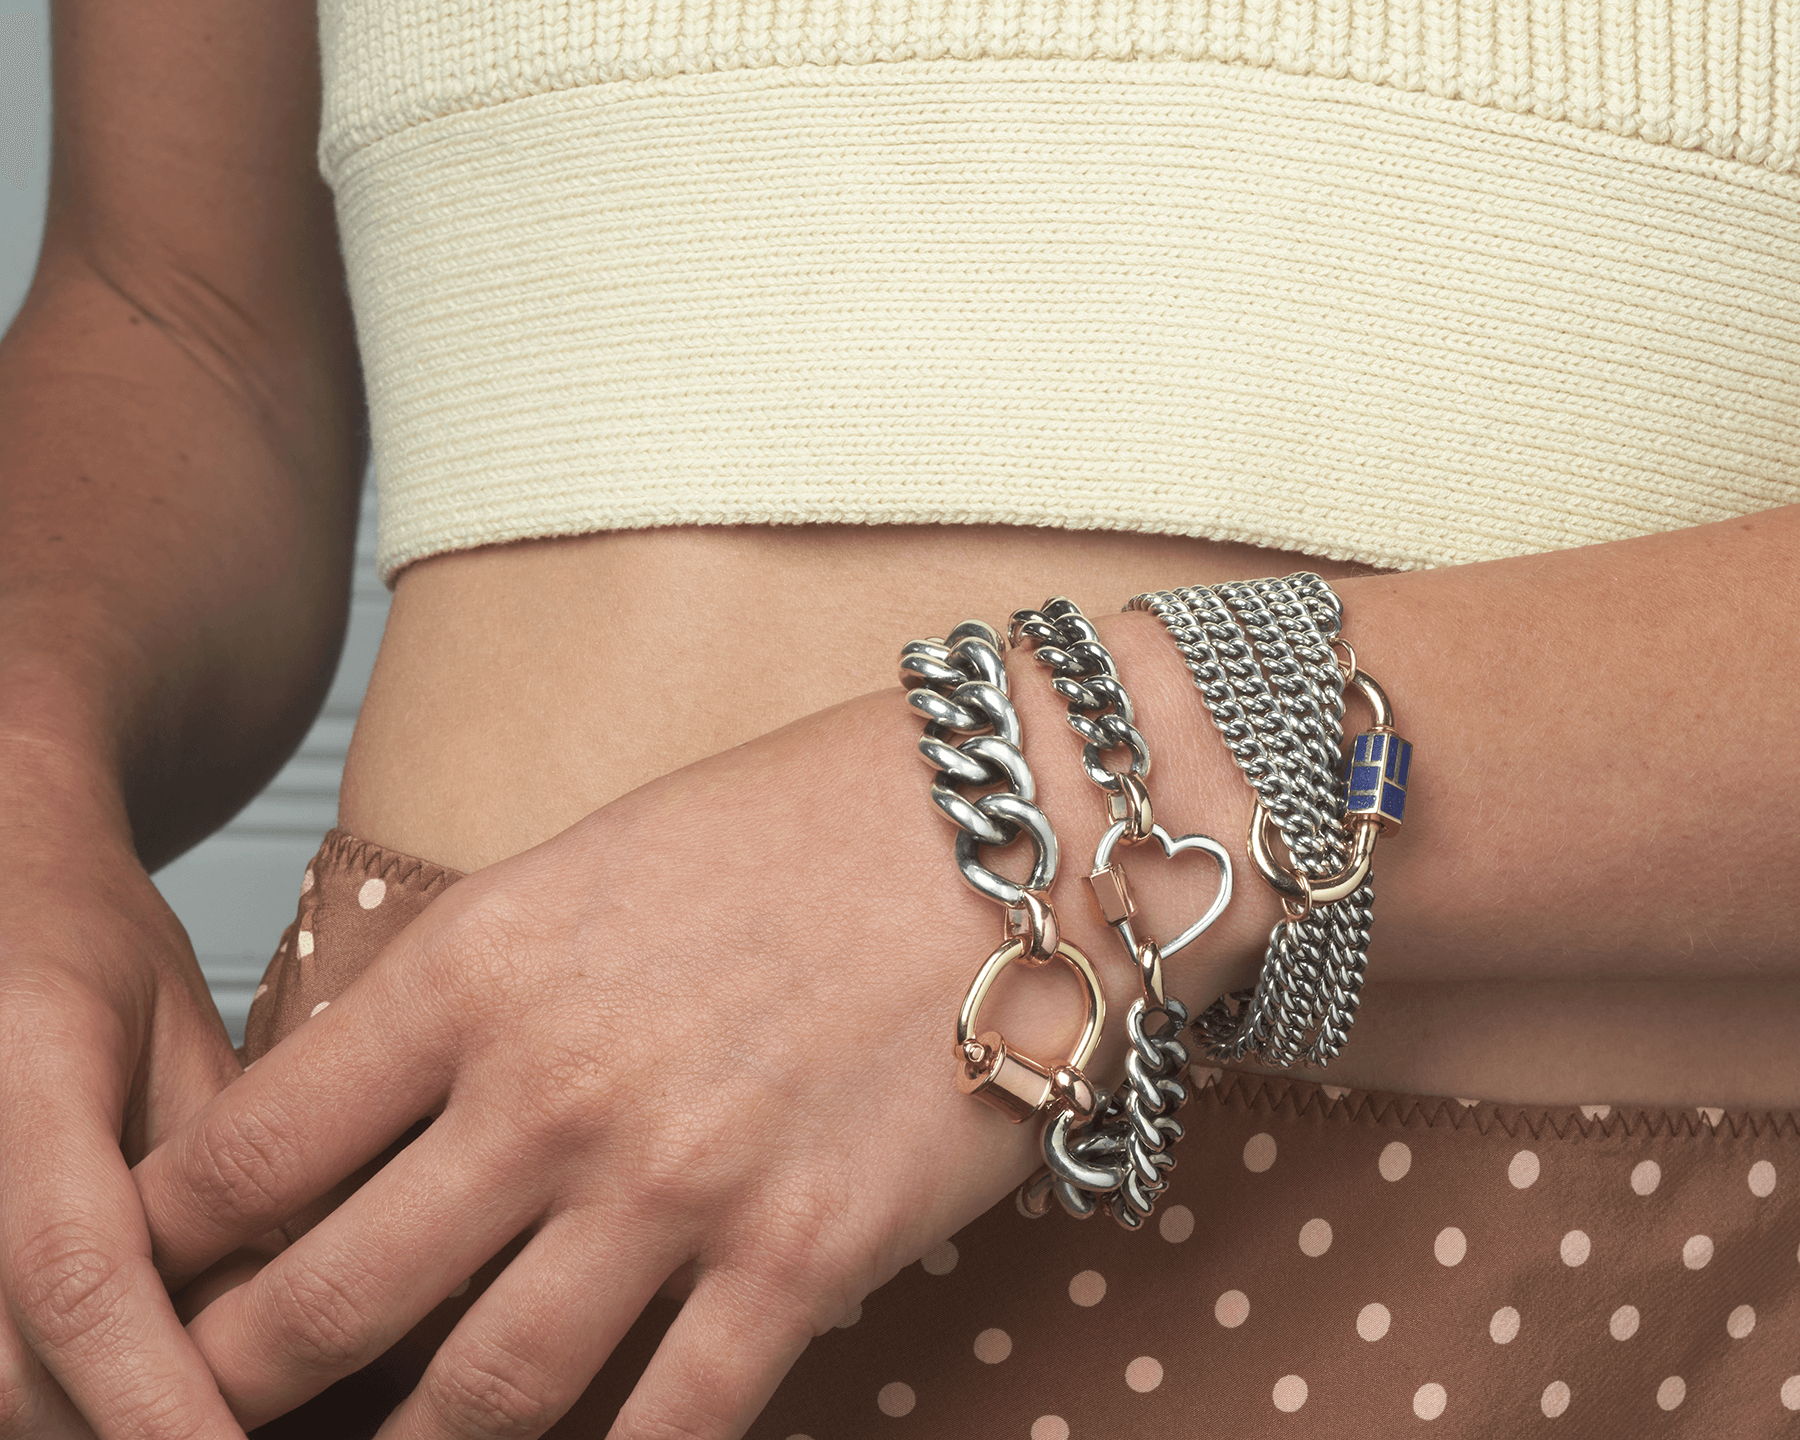 Close up of wrist wearing many bracelets including thick curb chain bracelet